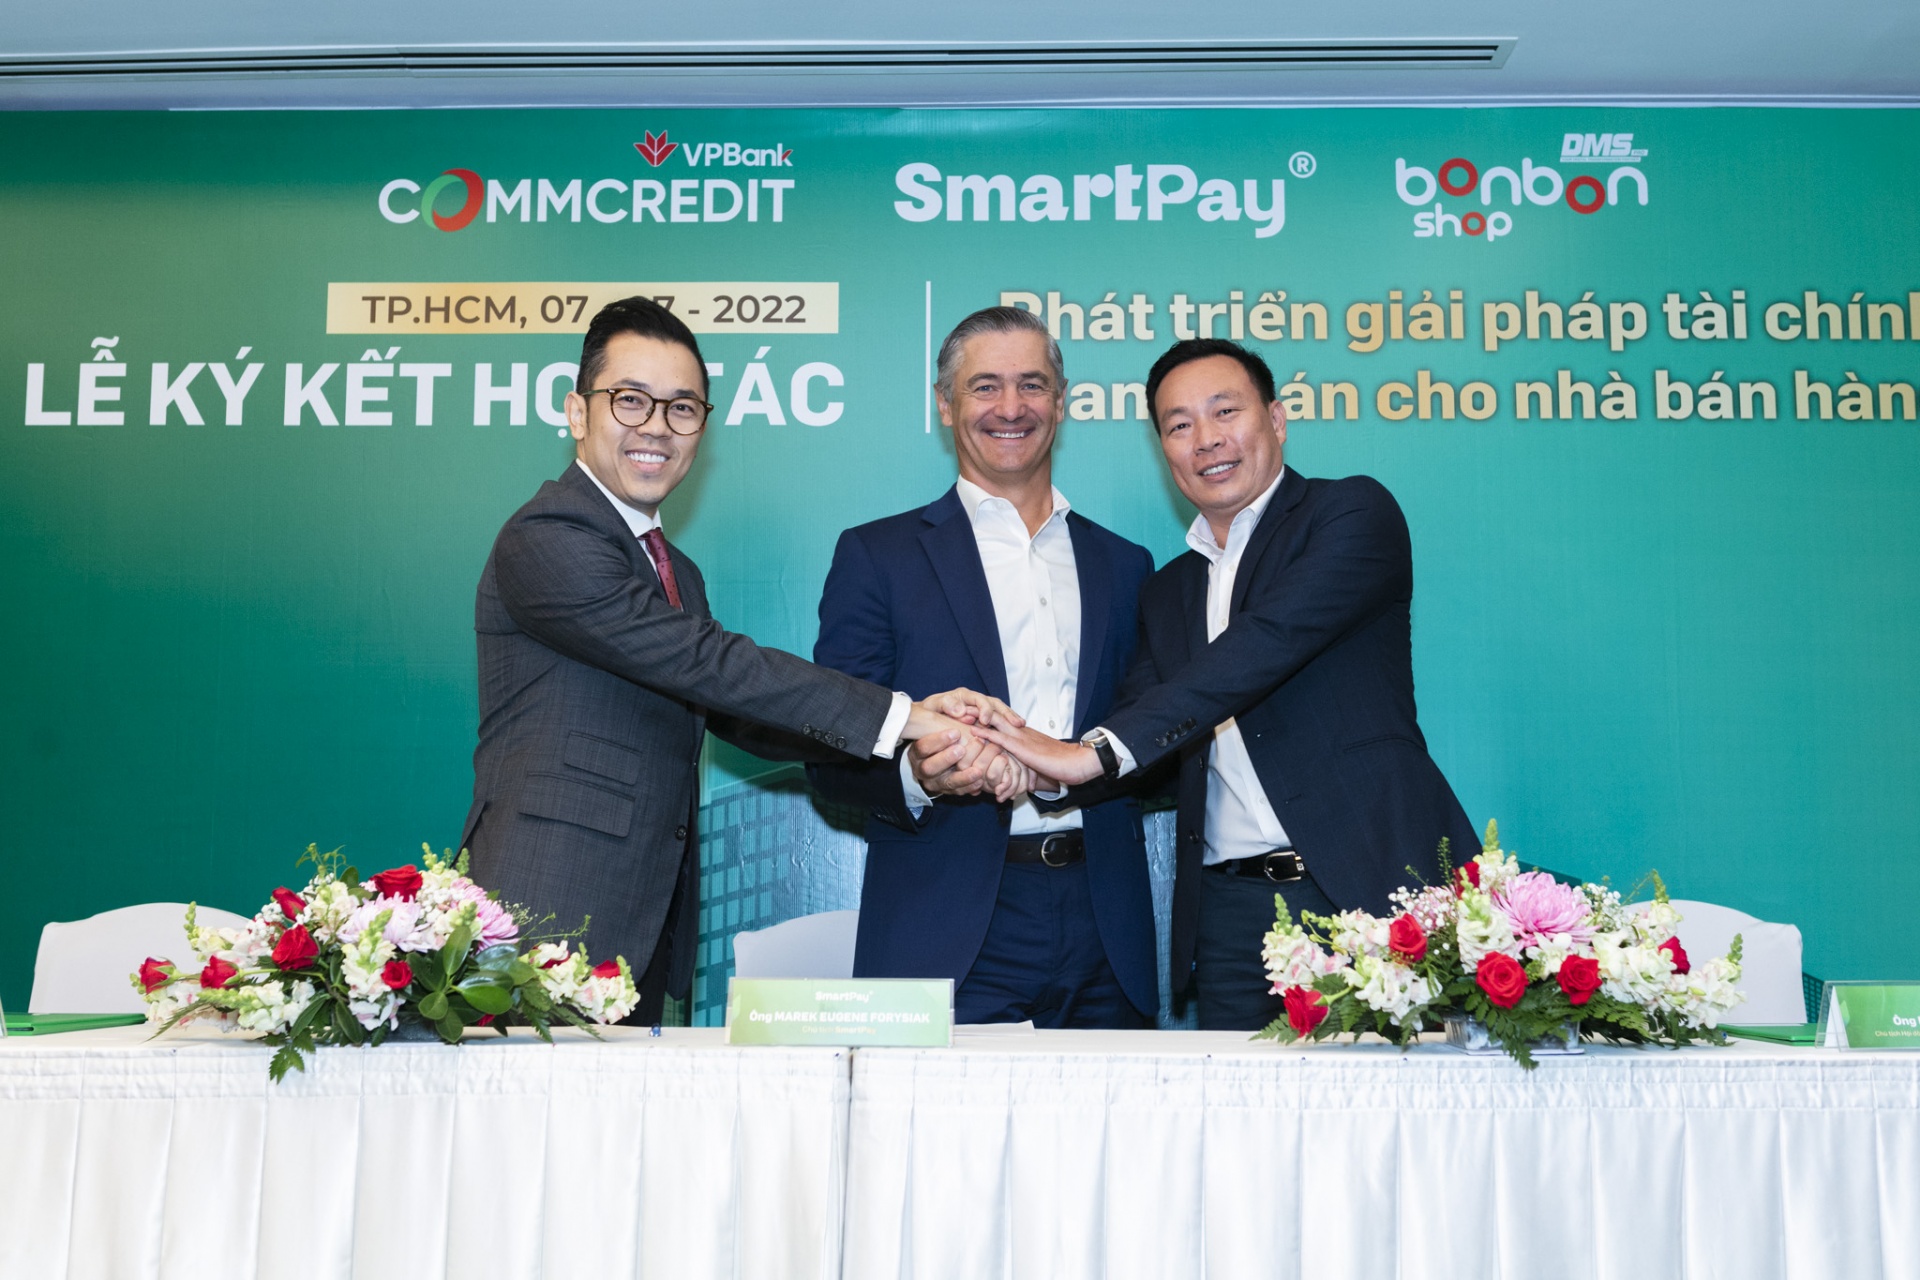 vpbank smartpay and dmspro enter strategic cooperation to provide financial solutions to merchants